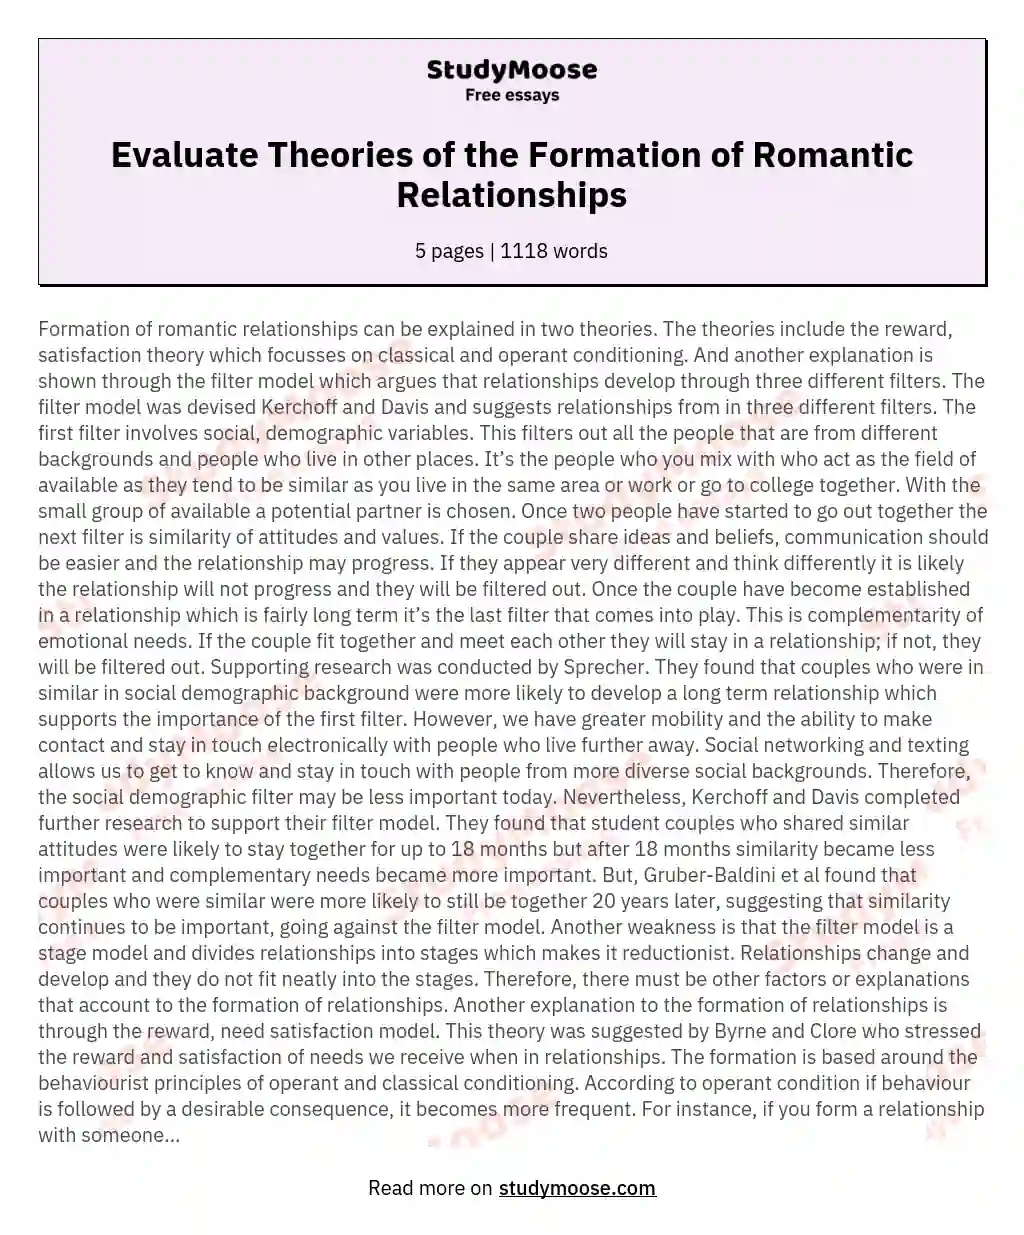 Evaluate Theories of the Formation of Romantic Relationships essay